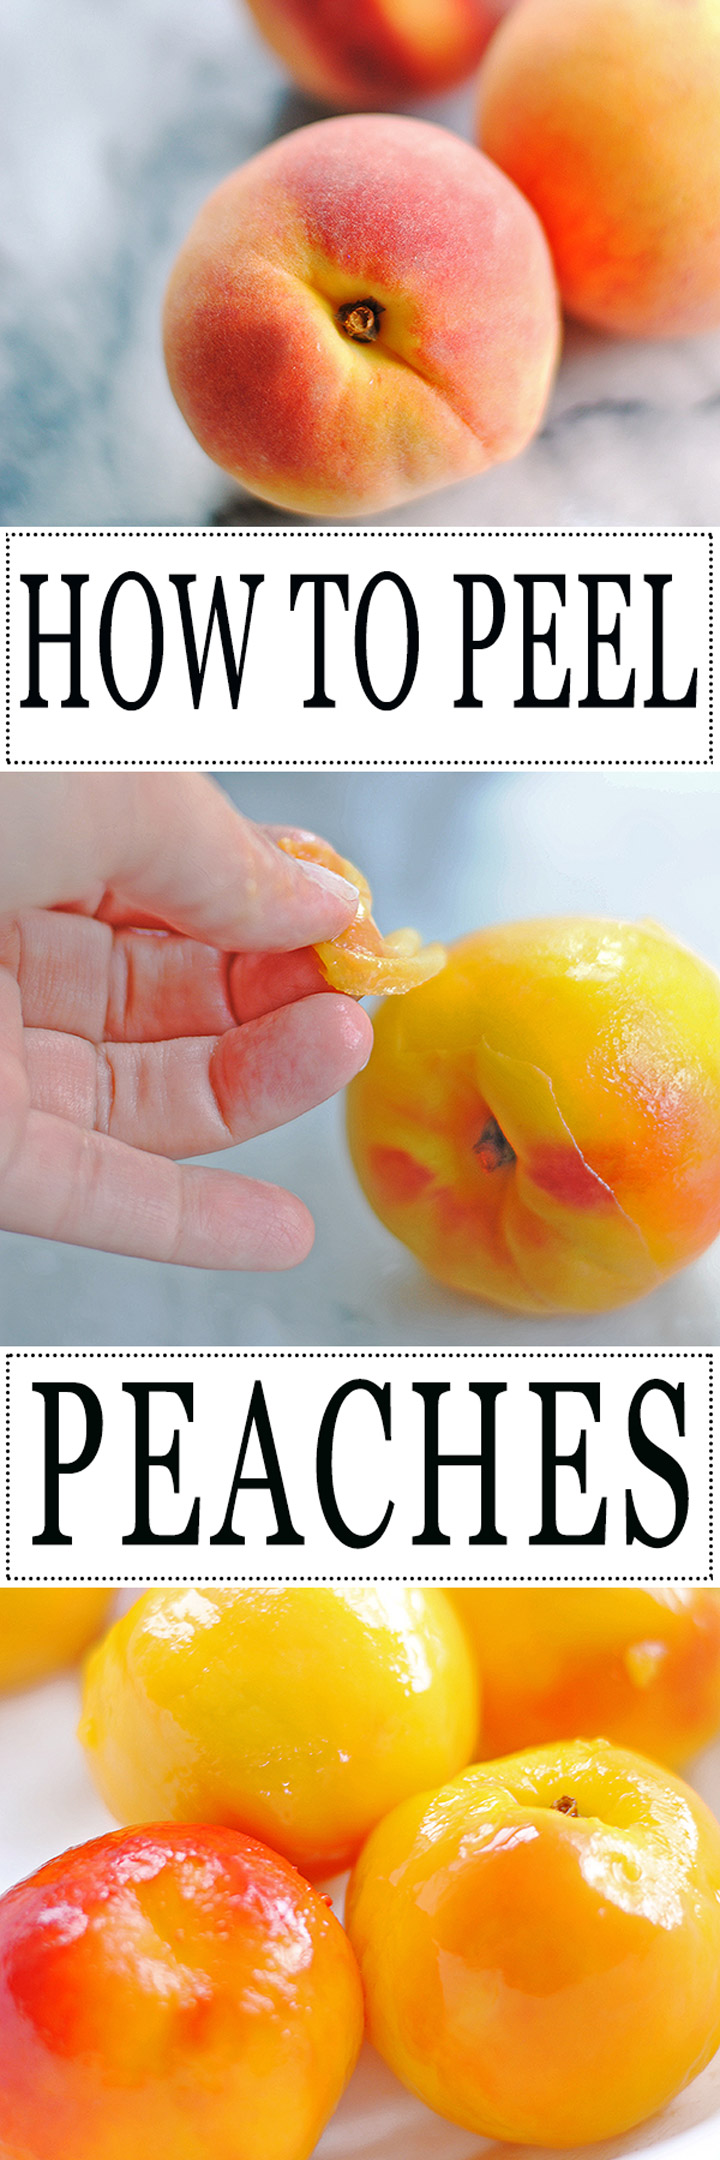 how to peel a peach the easy way